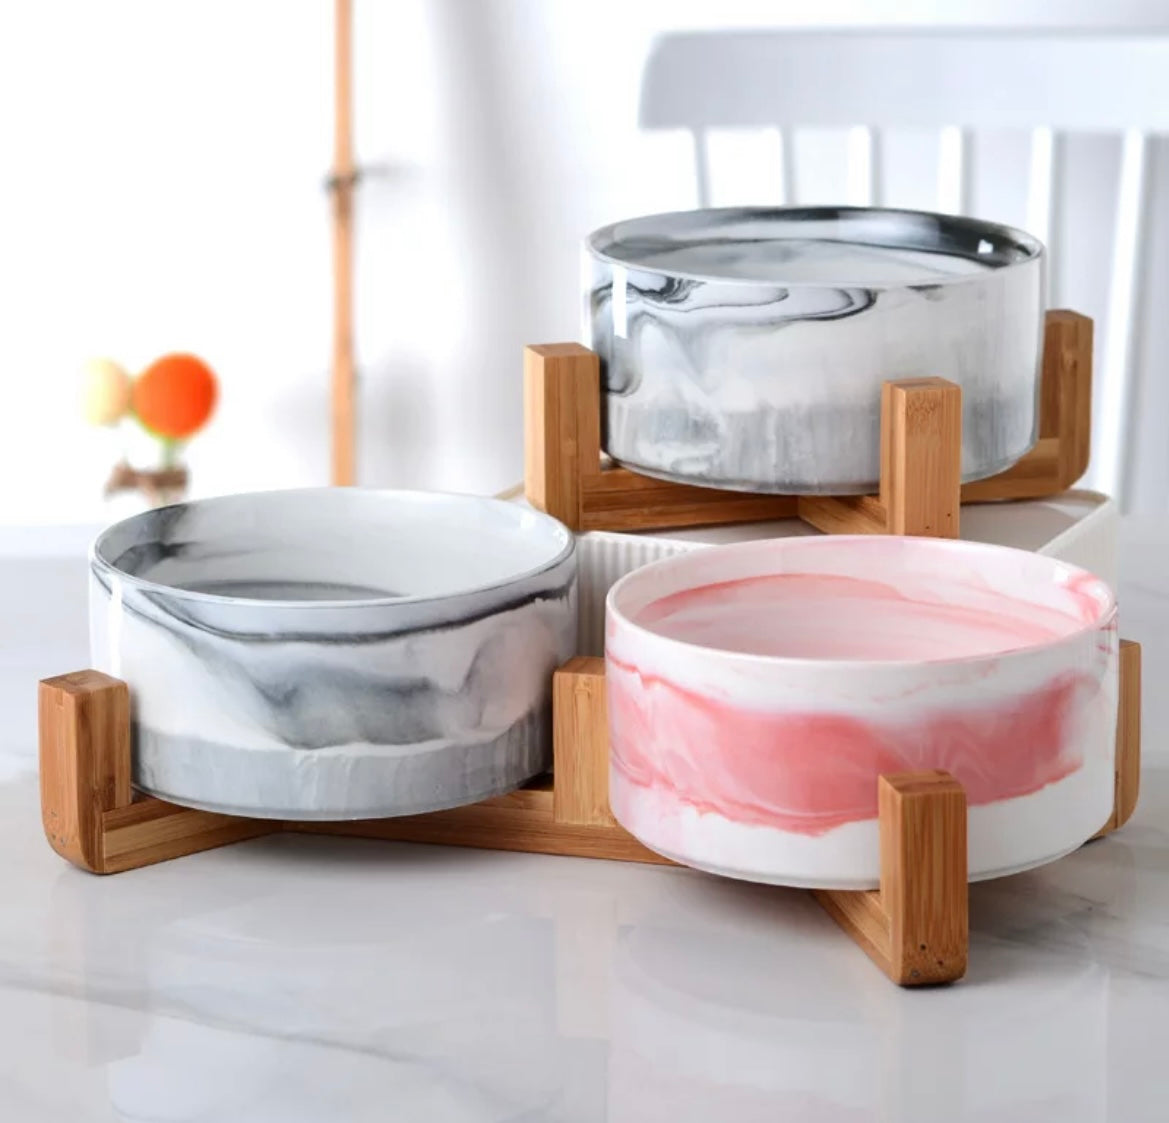 Paws N' Claws Boutique - Ceramic Bowls with Wooden Stand - 1